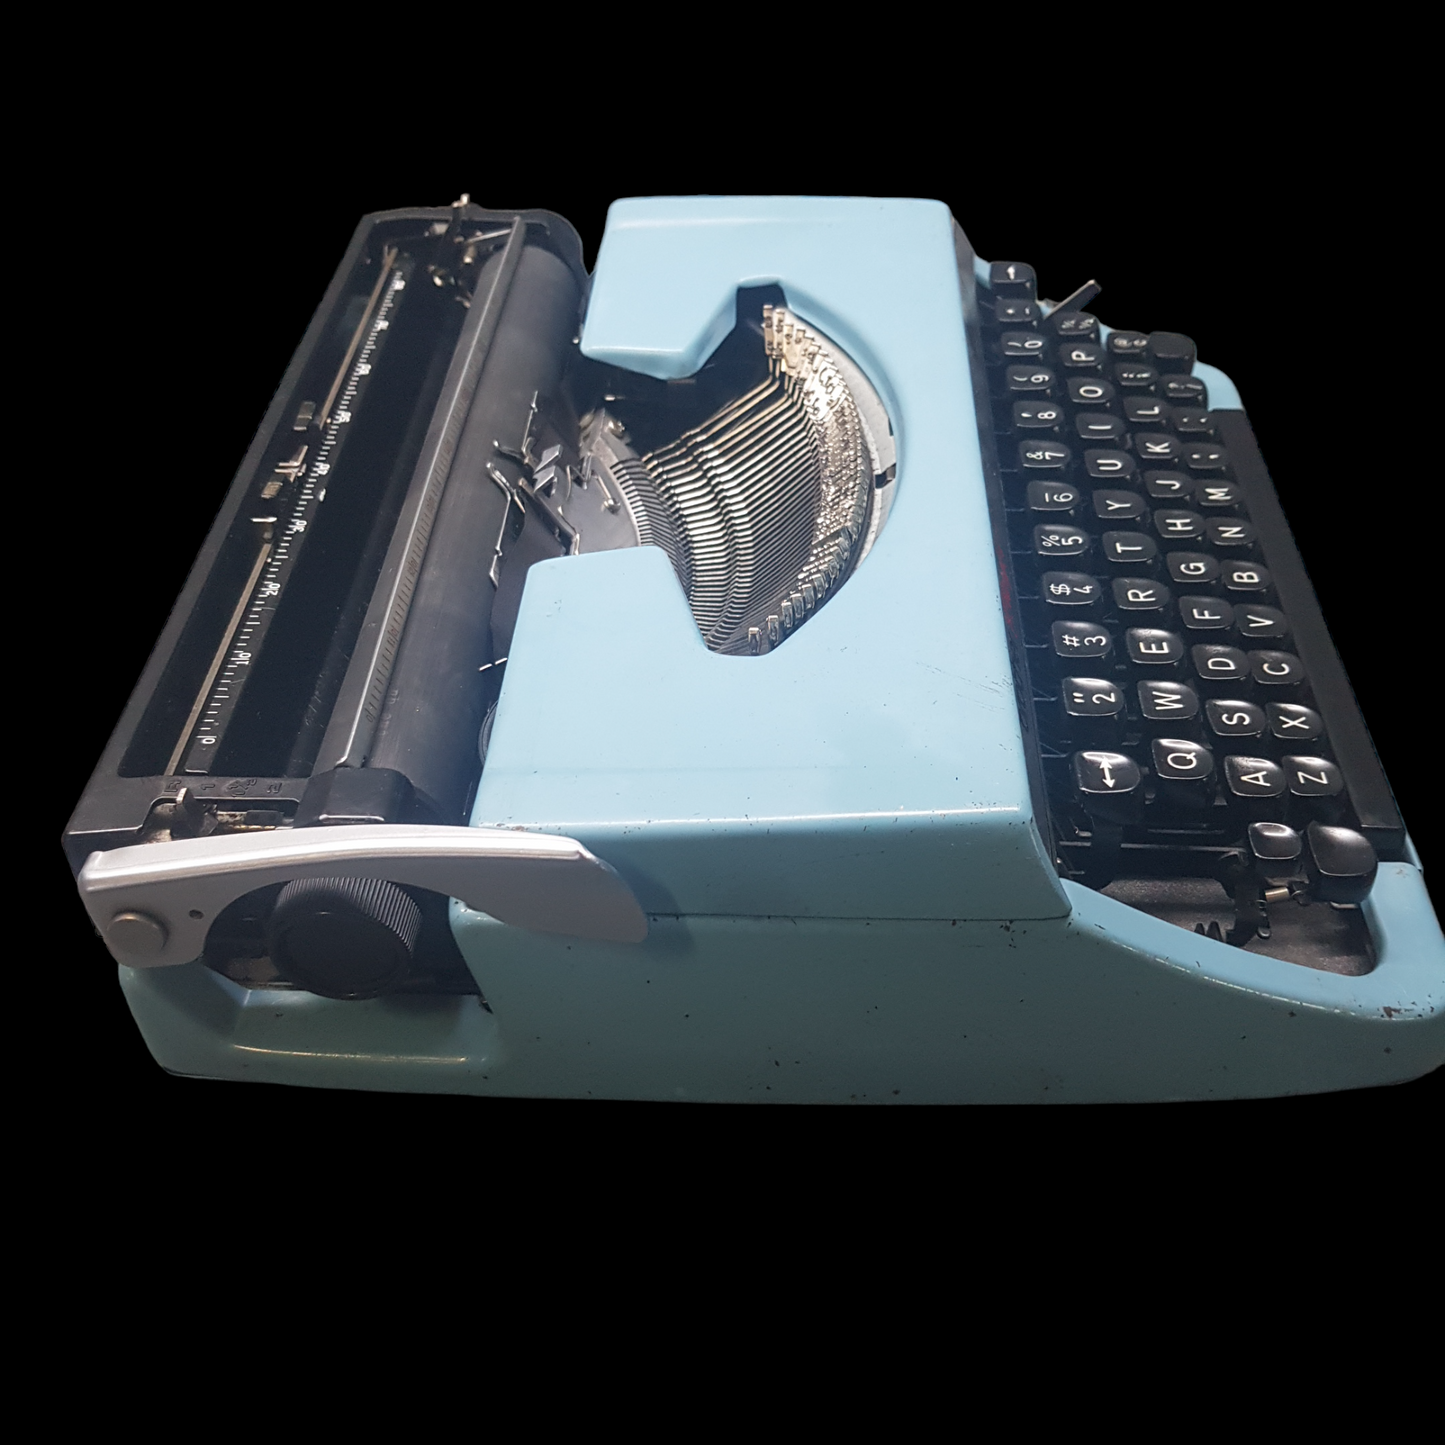 Image of Brother Charger 11 Typewriter. Portable Typewriter. Original Blue. Made in Japan. Available from universaltypewritercompany.in.